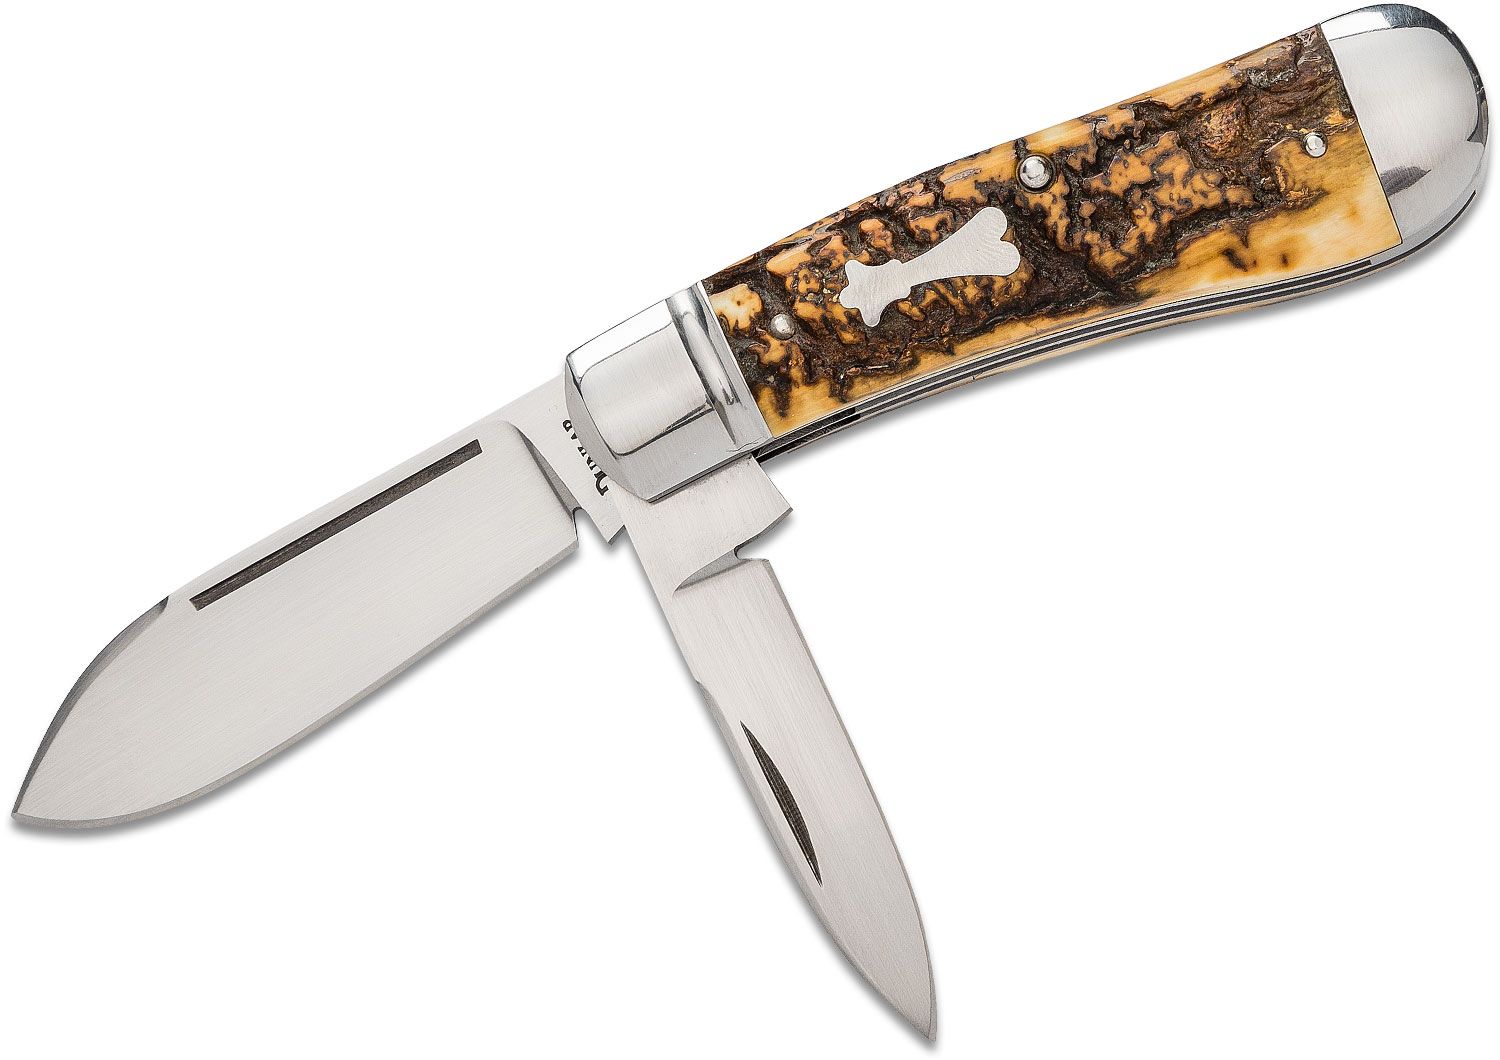 Jim Dunlap Custom Dog Leg Jack Traditional Folding Knife, CPM-154 Hand  Rubbed Satin Blades, Fossilized Mammoth Bark Handles with Stainless Steel  Bolsters - KnifeCenter - Discontinued